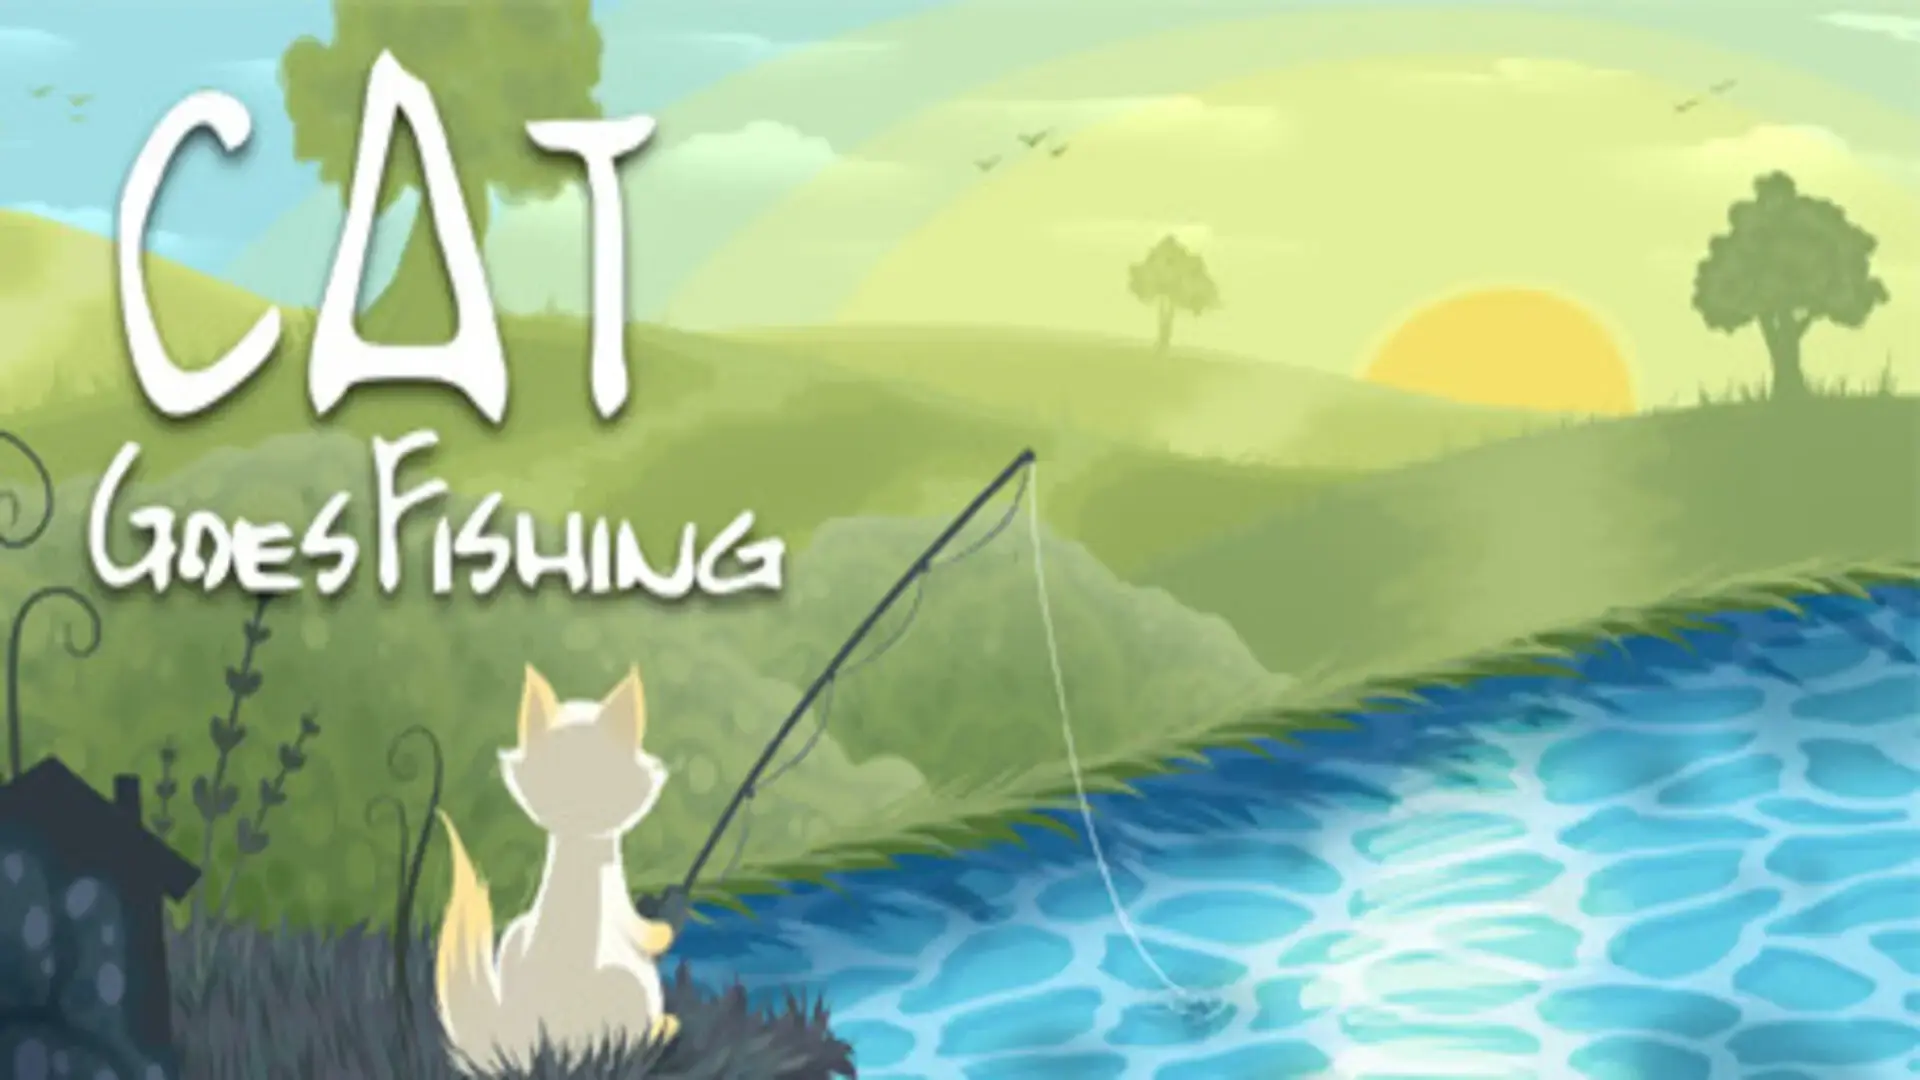 Cat Goes Fishing – Free Download (Build 12575339)